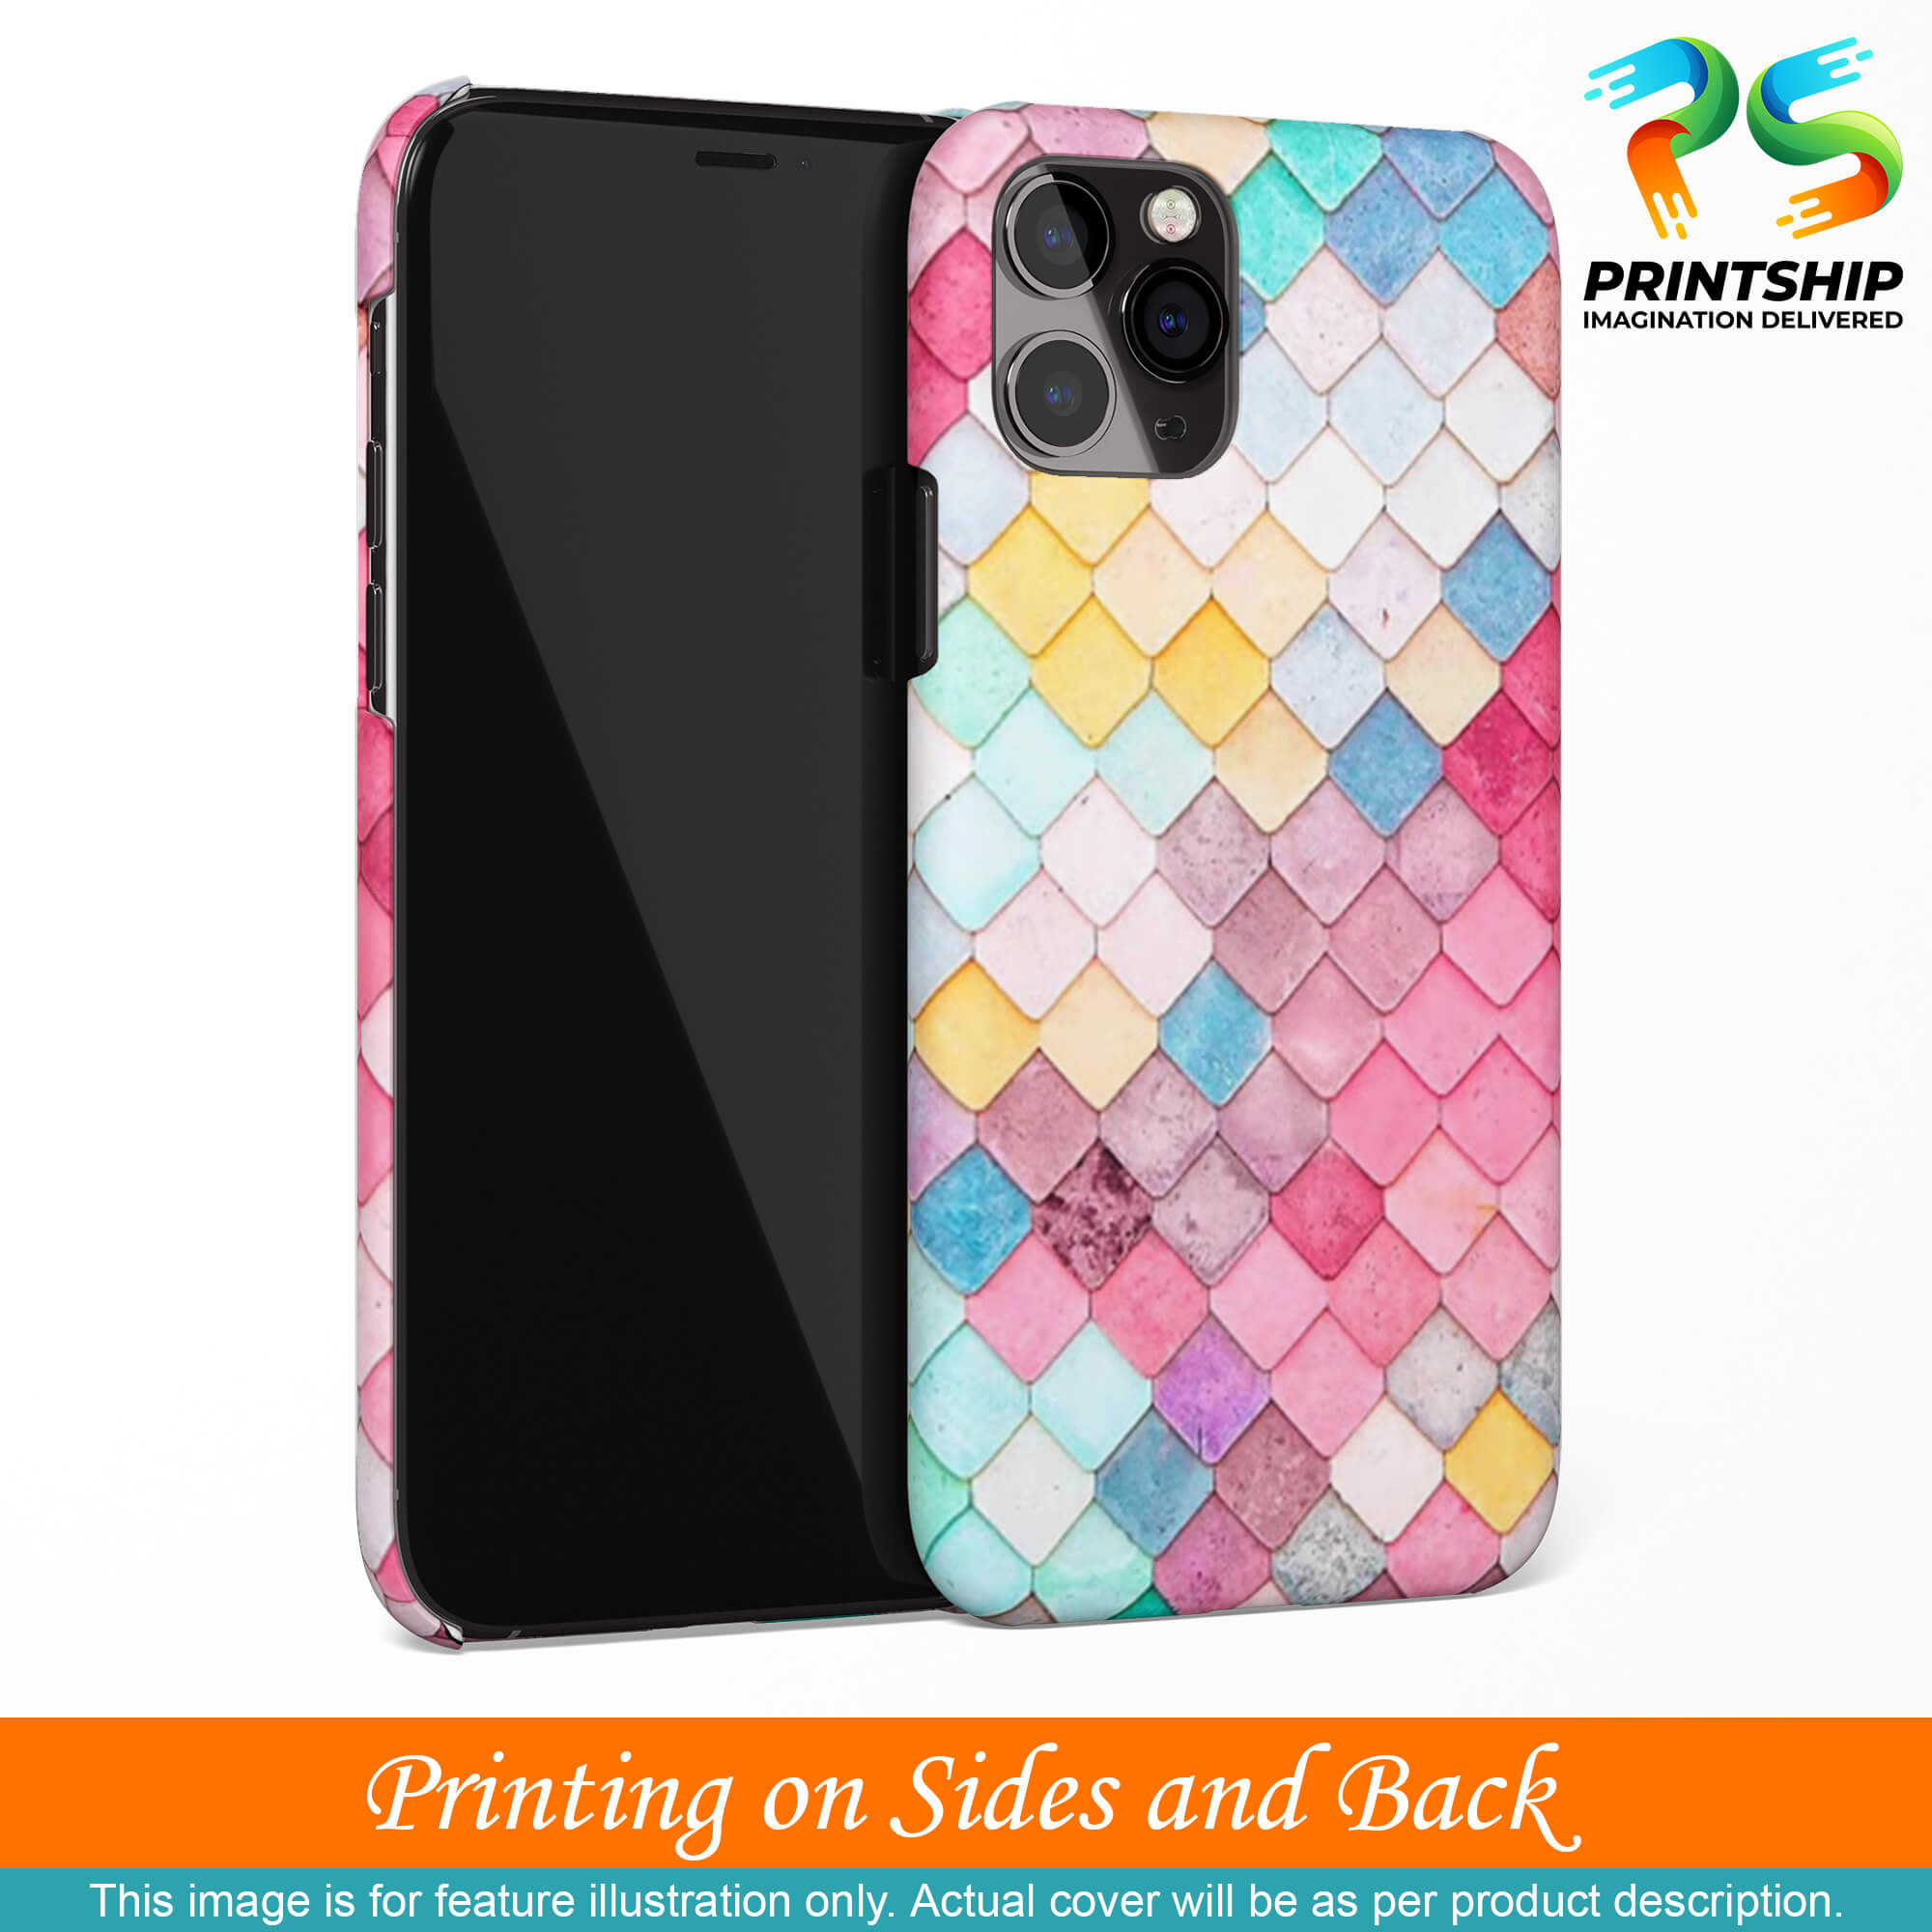 PS1310-Colorful Pastel Back Cover for Samsung Galaxy Note20-Image3